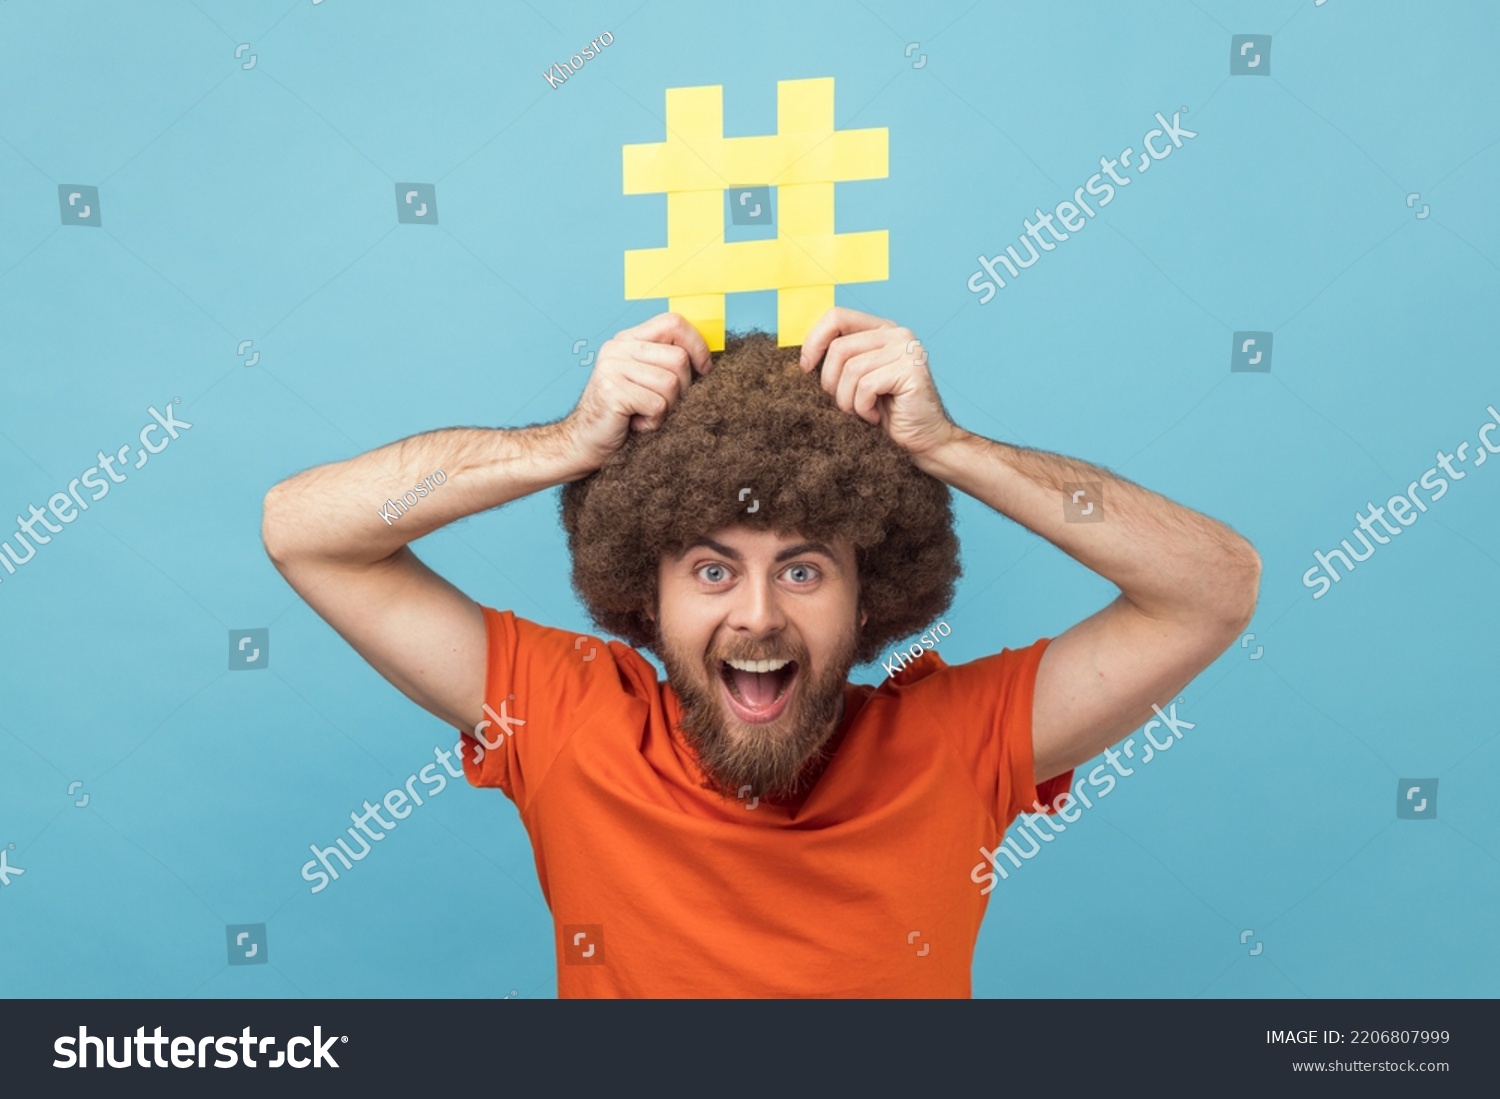 Portrait of man with Afro hairstyle holding yellow hashtag sign board on head, dreaming about target tagging posts on his website, smm manager. Indoor studio shot isolated on blue background. #2206807999